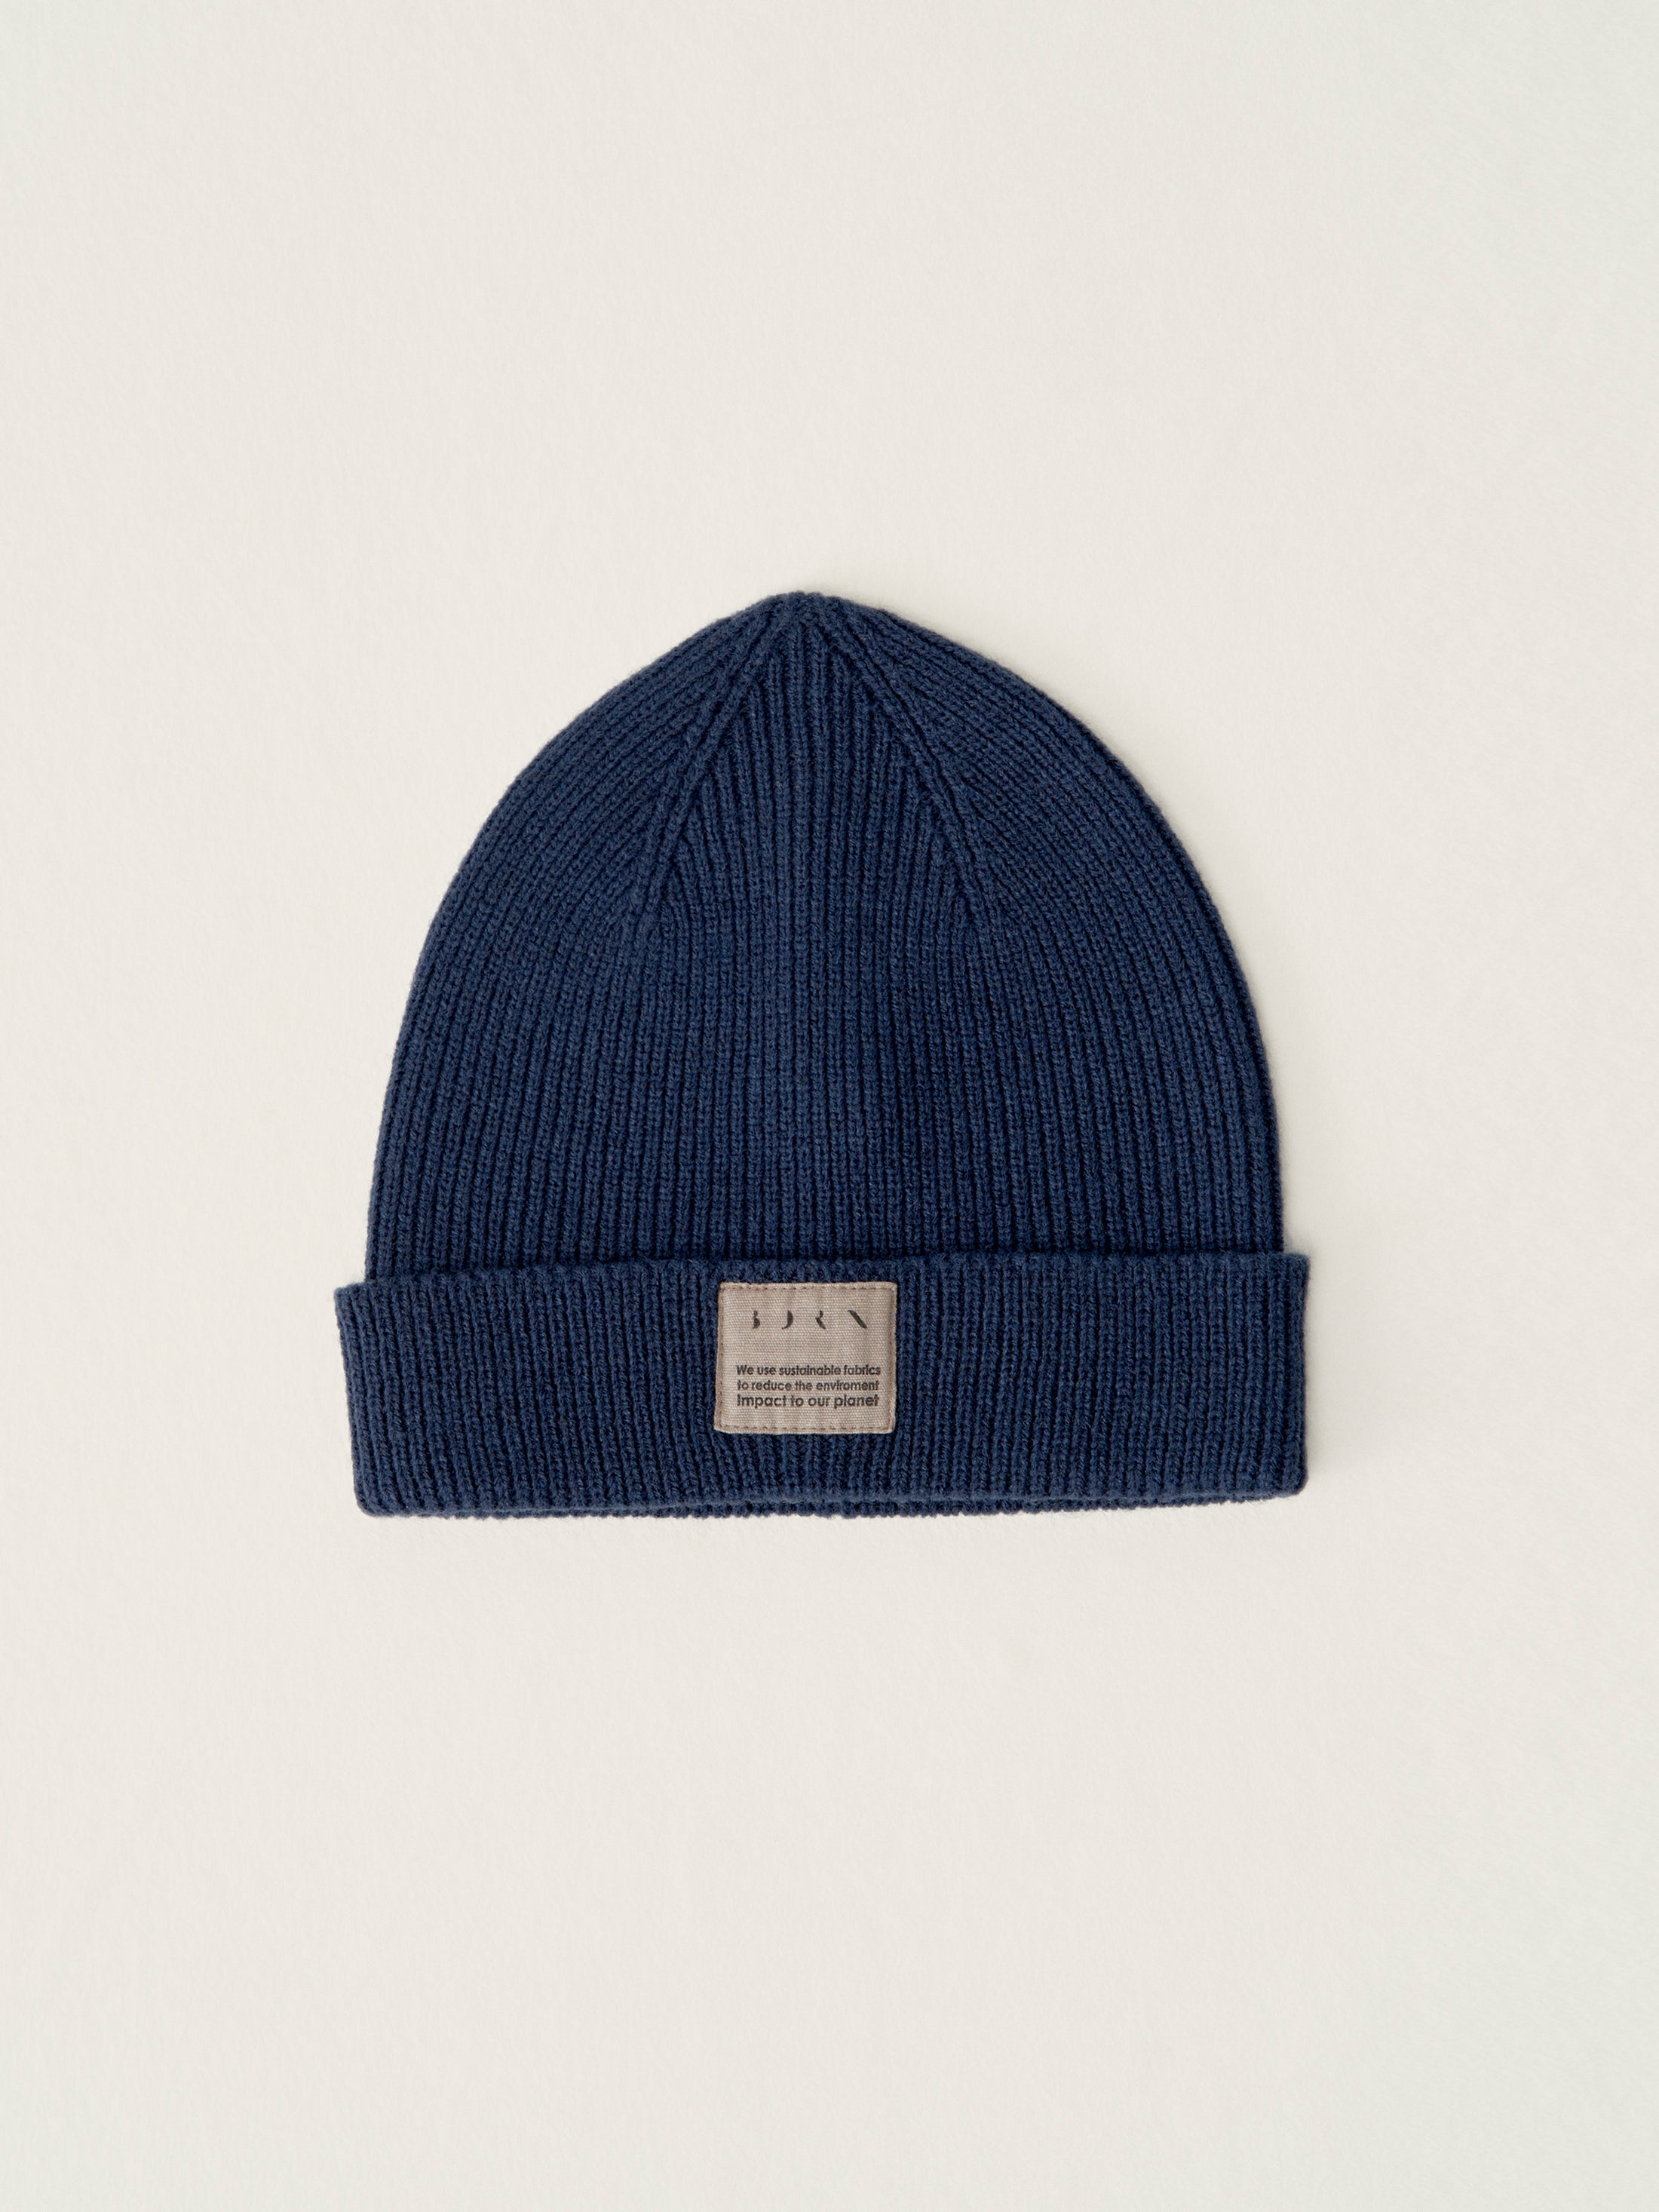 Indo Hat in Deep Blue